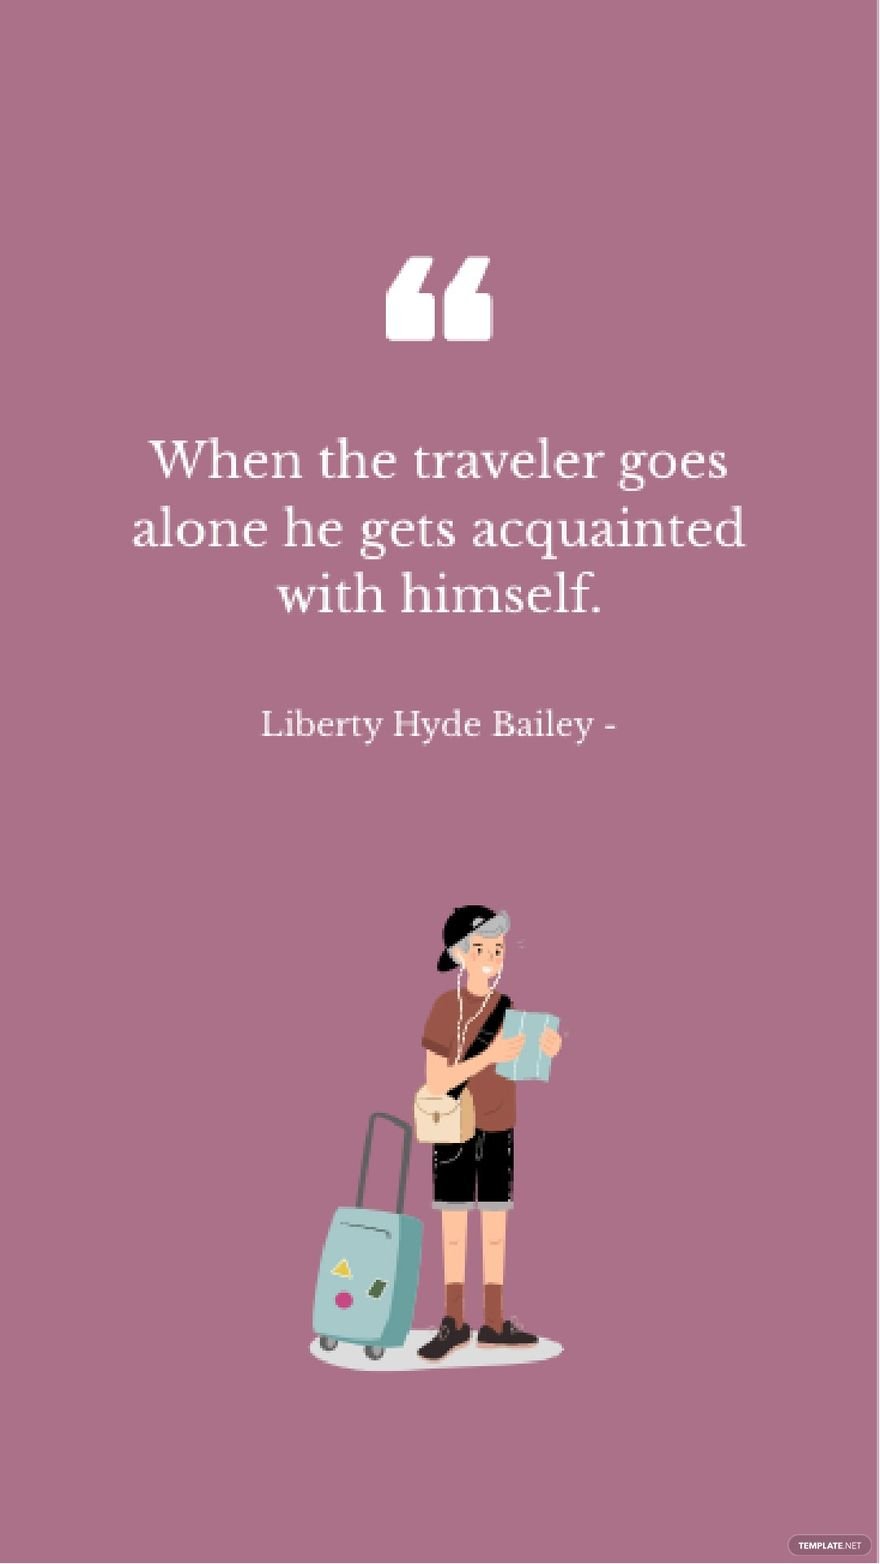 Liberty Hyde Bailey - When the traveler goes alone he gets acquainted with himself.